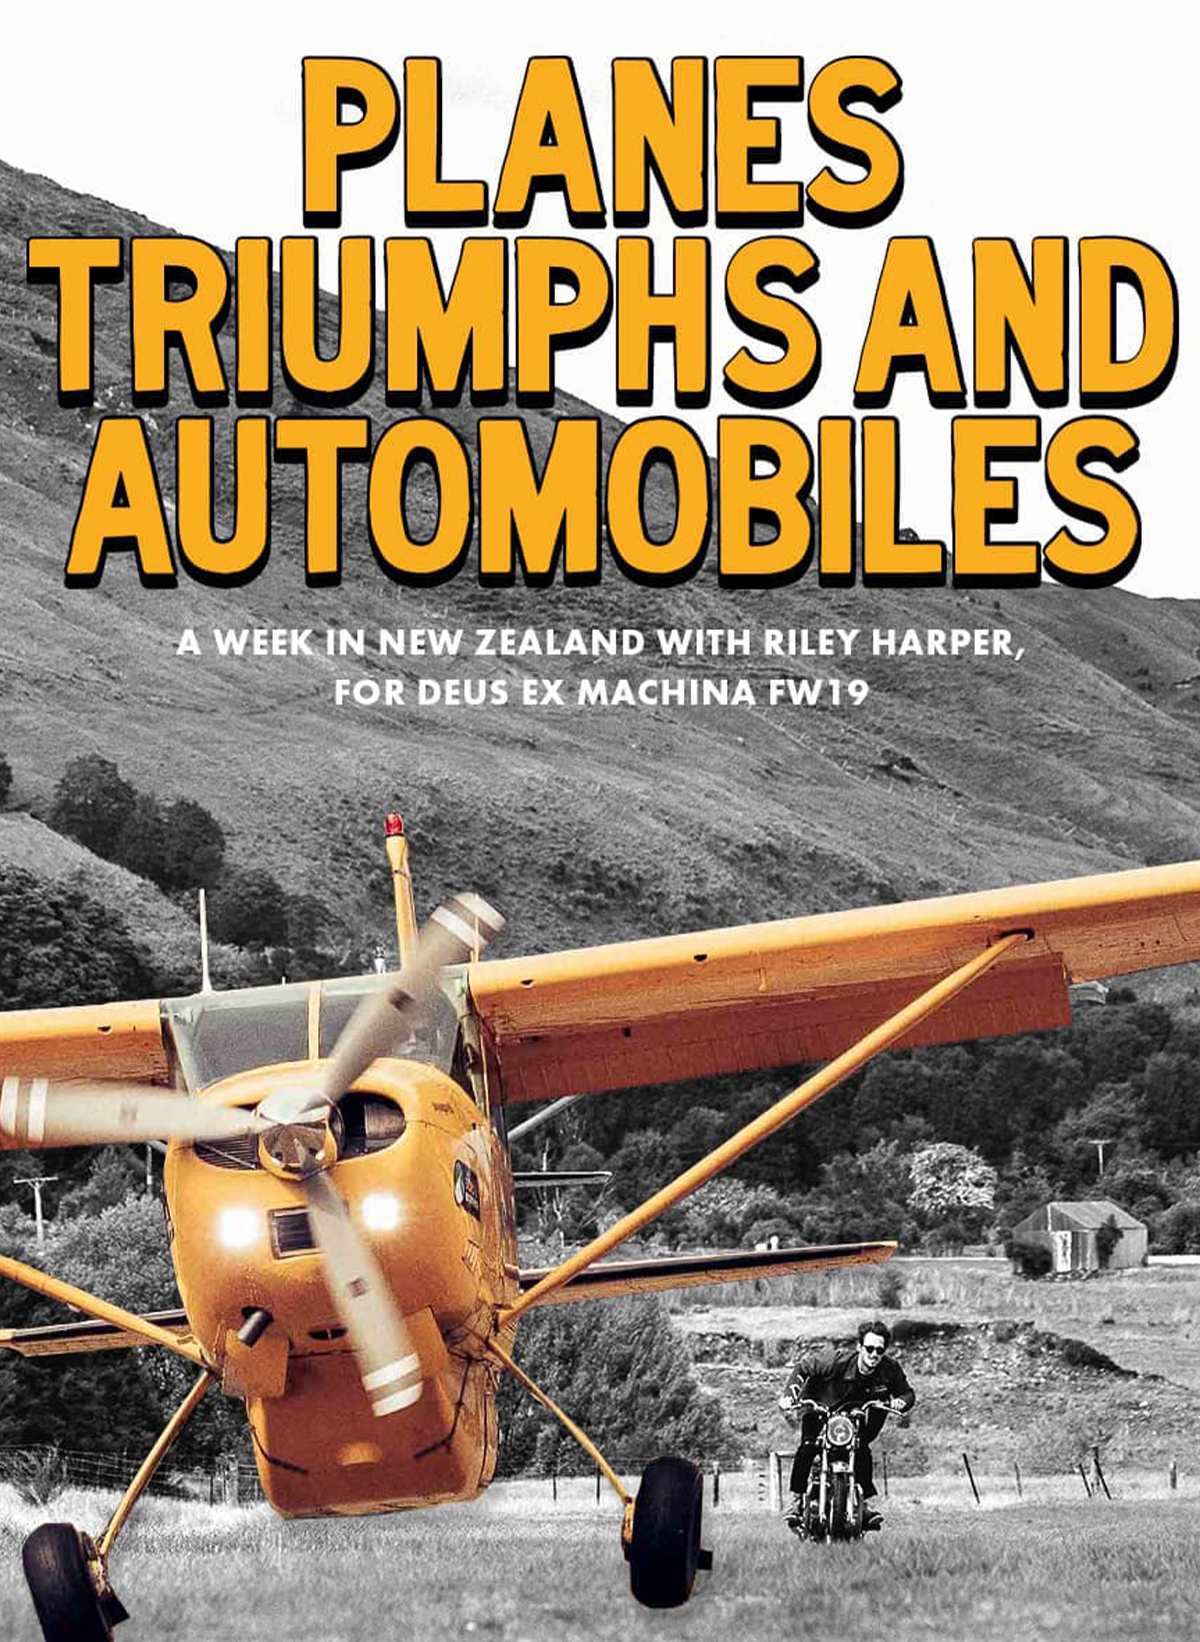 Planes, Triumphs & Automobiles - Behind The Scenes in New Zealand